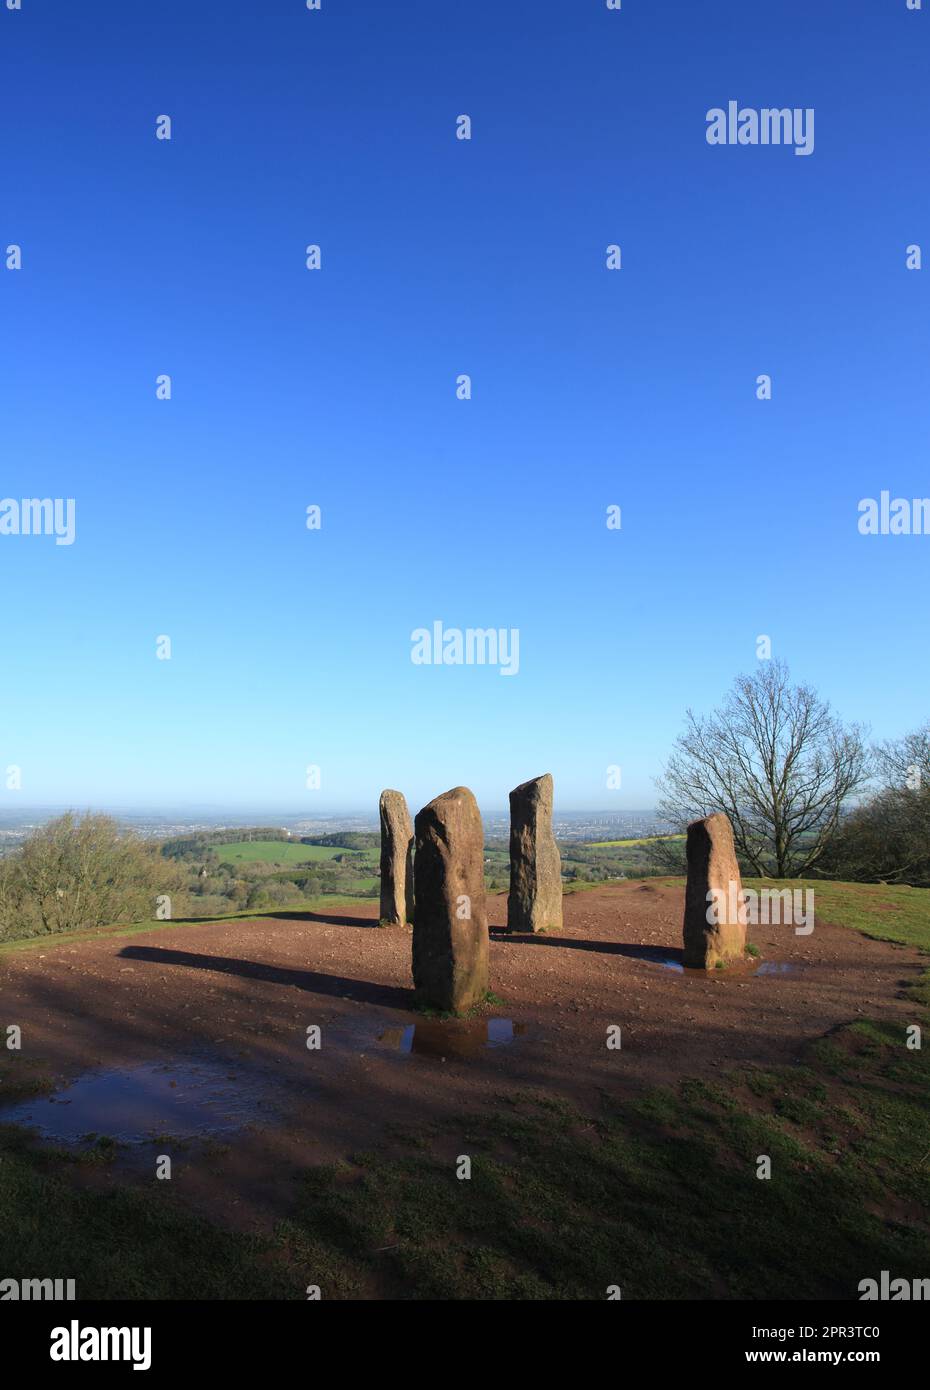 The Four stones on the summit of the Clent hills, Worcestershire, England, UK. Stock Photo